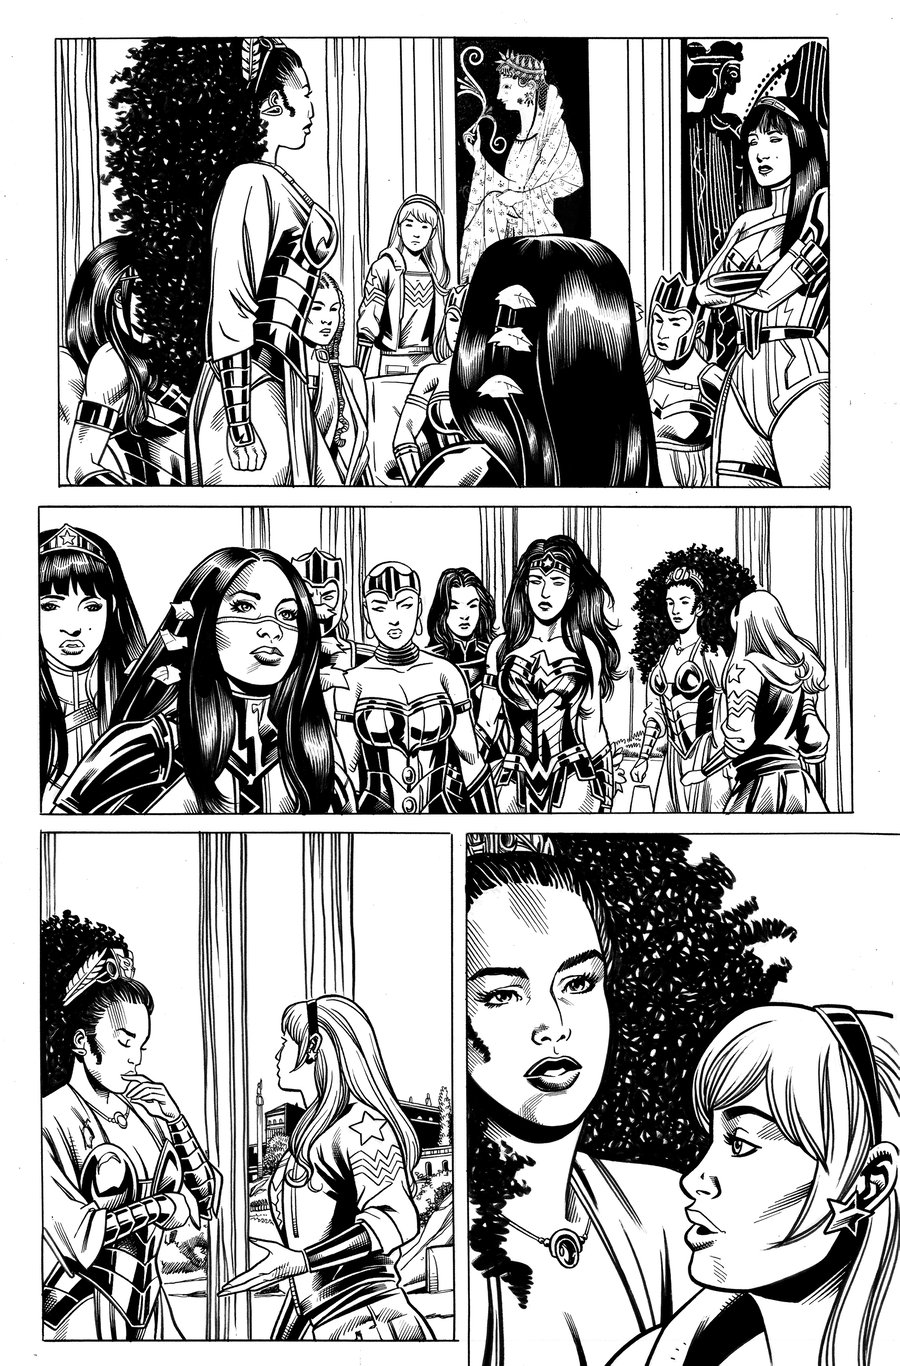 Image of Nubia and the Amazons #6 PG 13